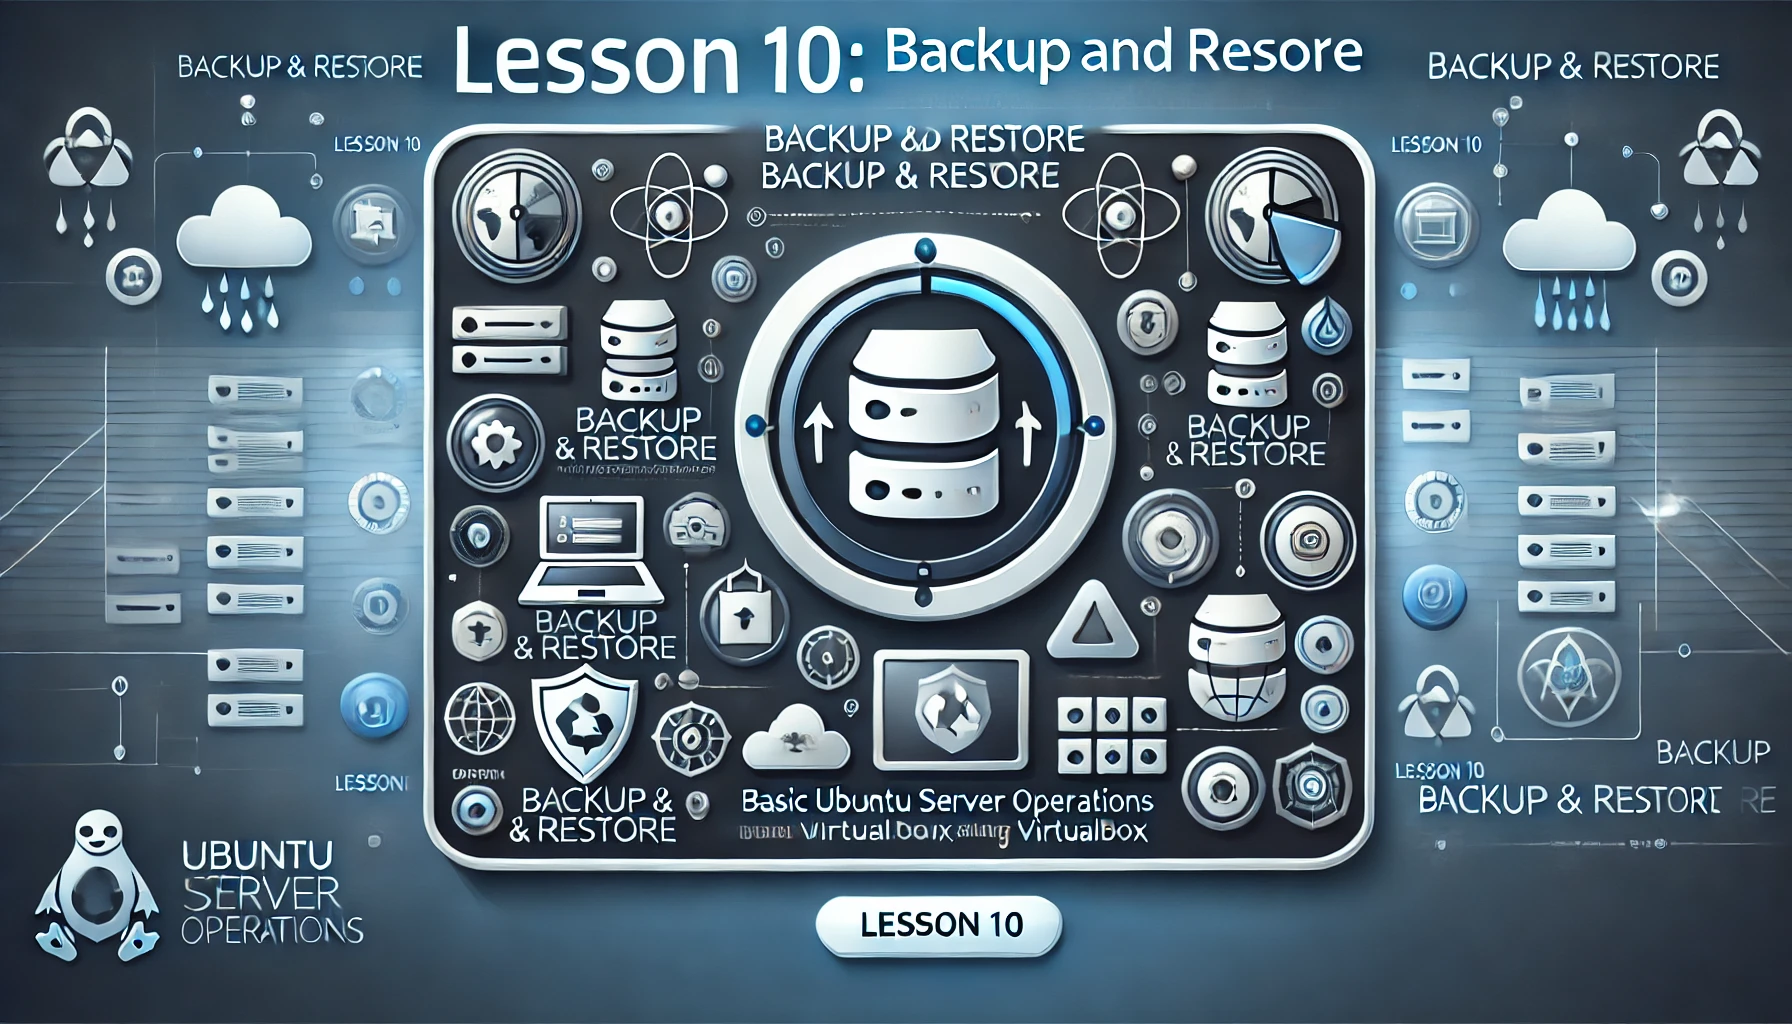 Lesson 10 - Backup and Restore